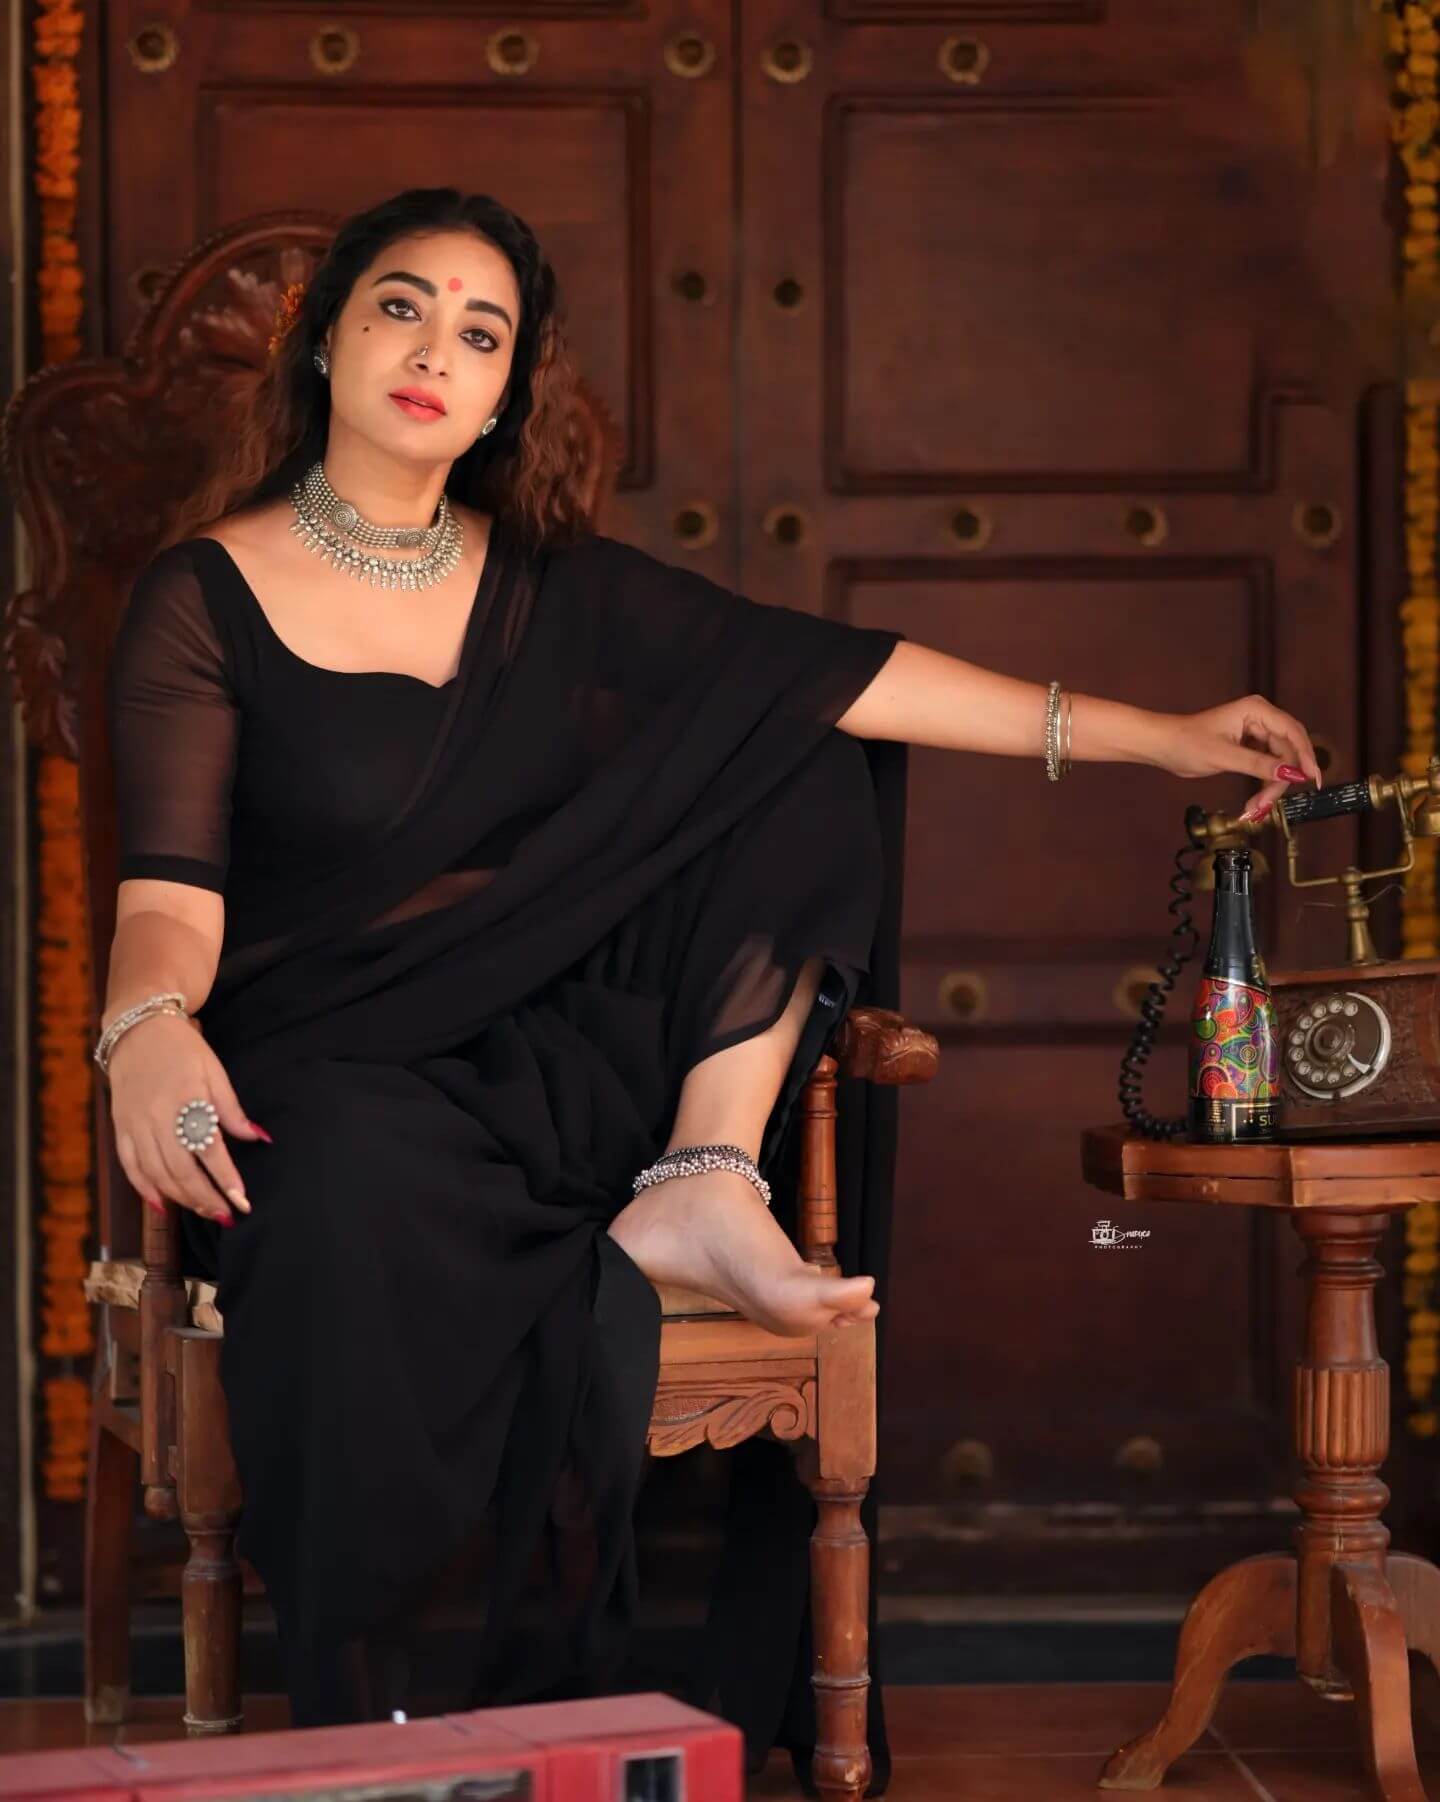 Bhanu Sri Mehra Recreated The GauguBaiKathiawadi Look In Her Own Touch By Wearing Black Saree